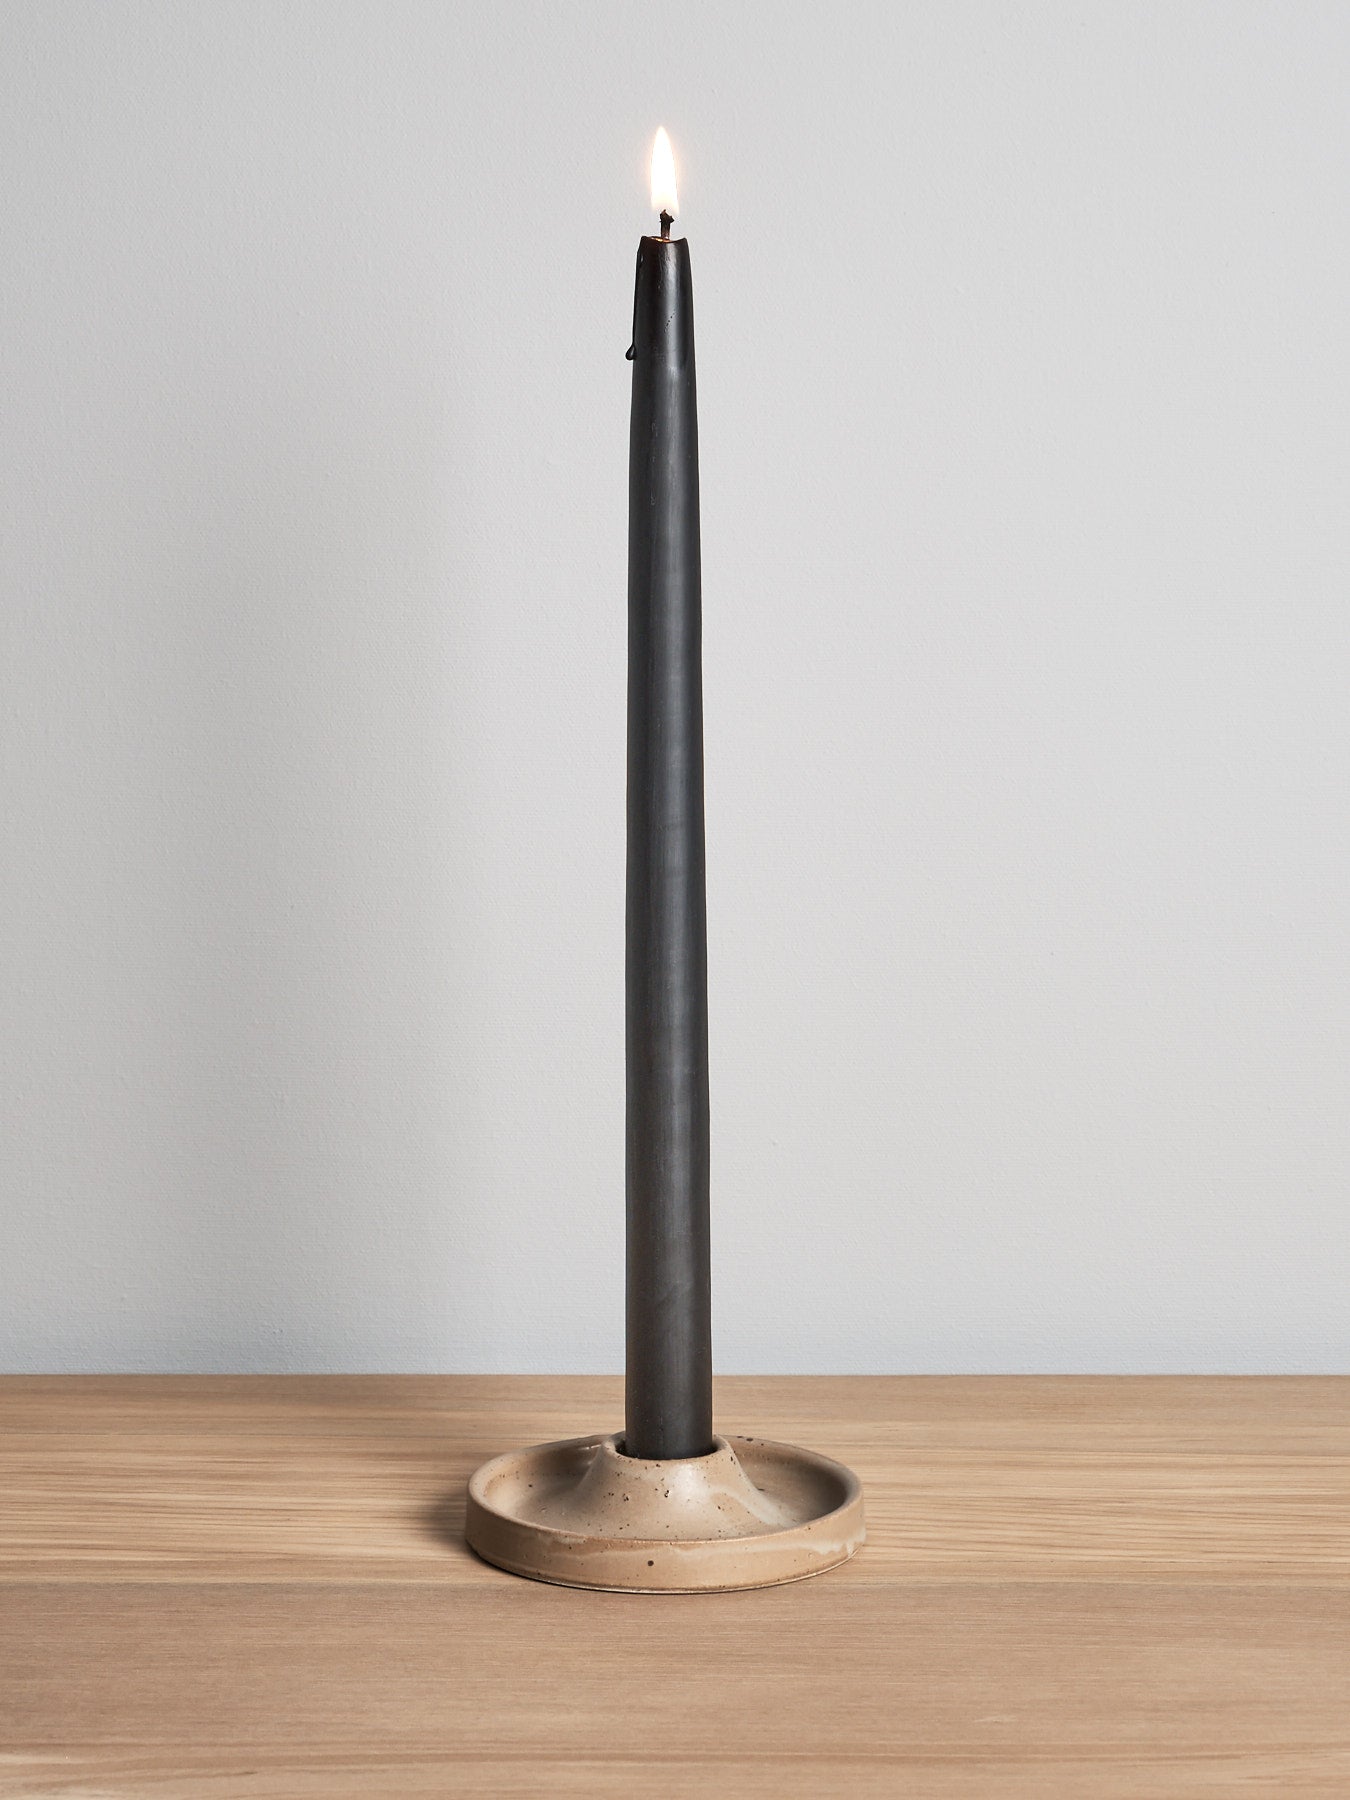 A Candle Holder - Walnut by deborah sweeney is sitting on a wooden table.